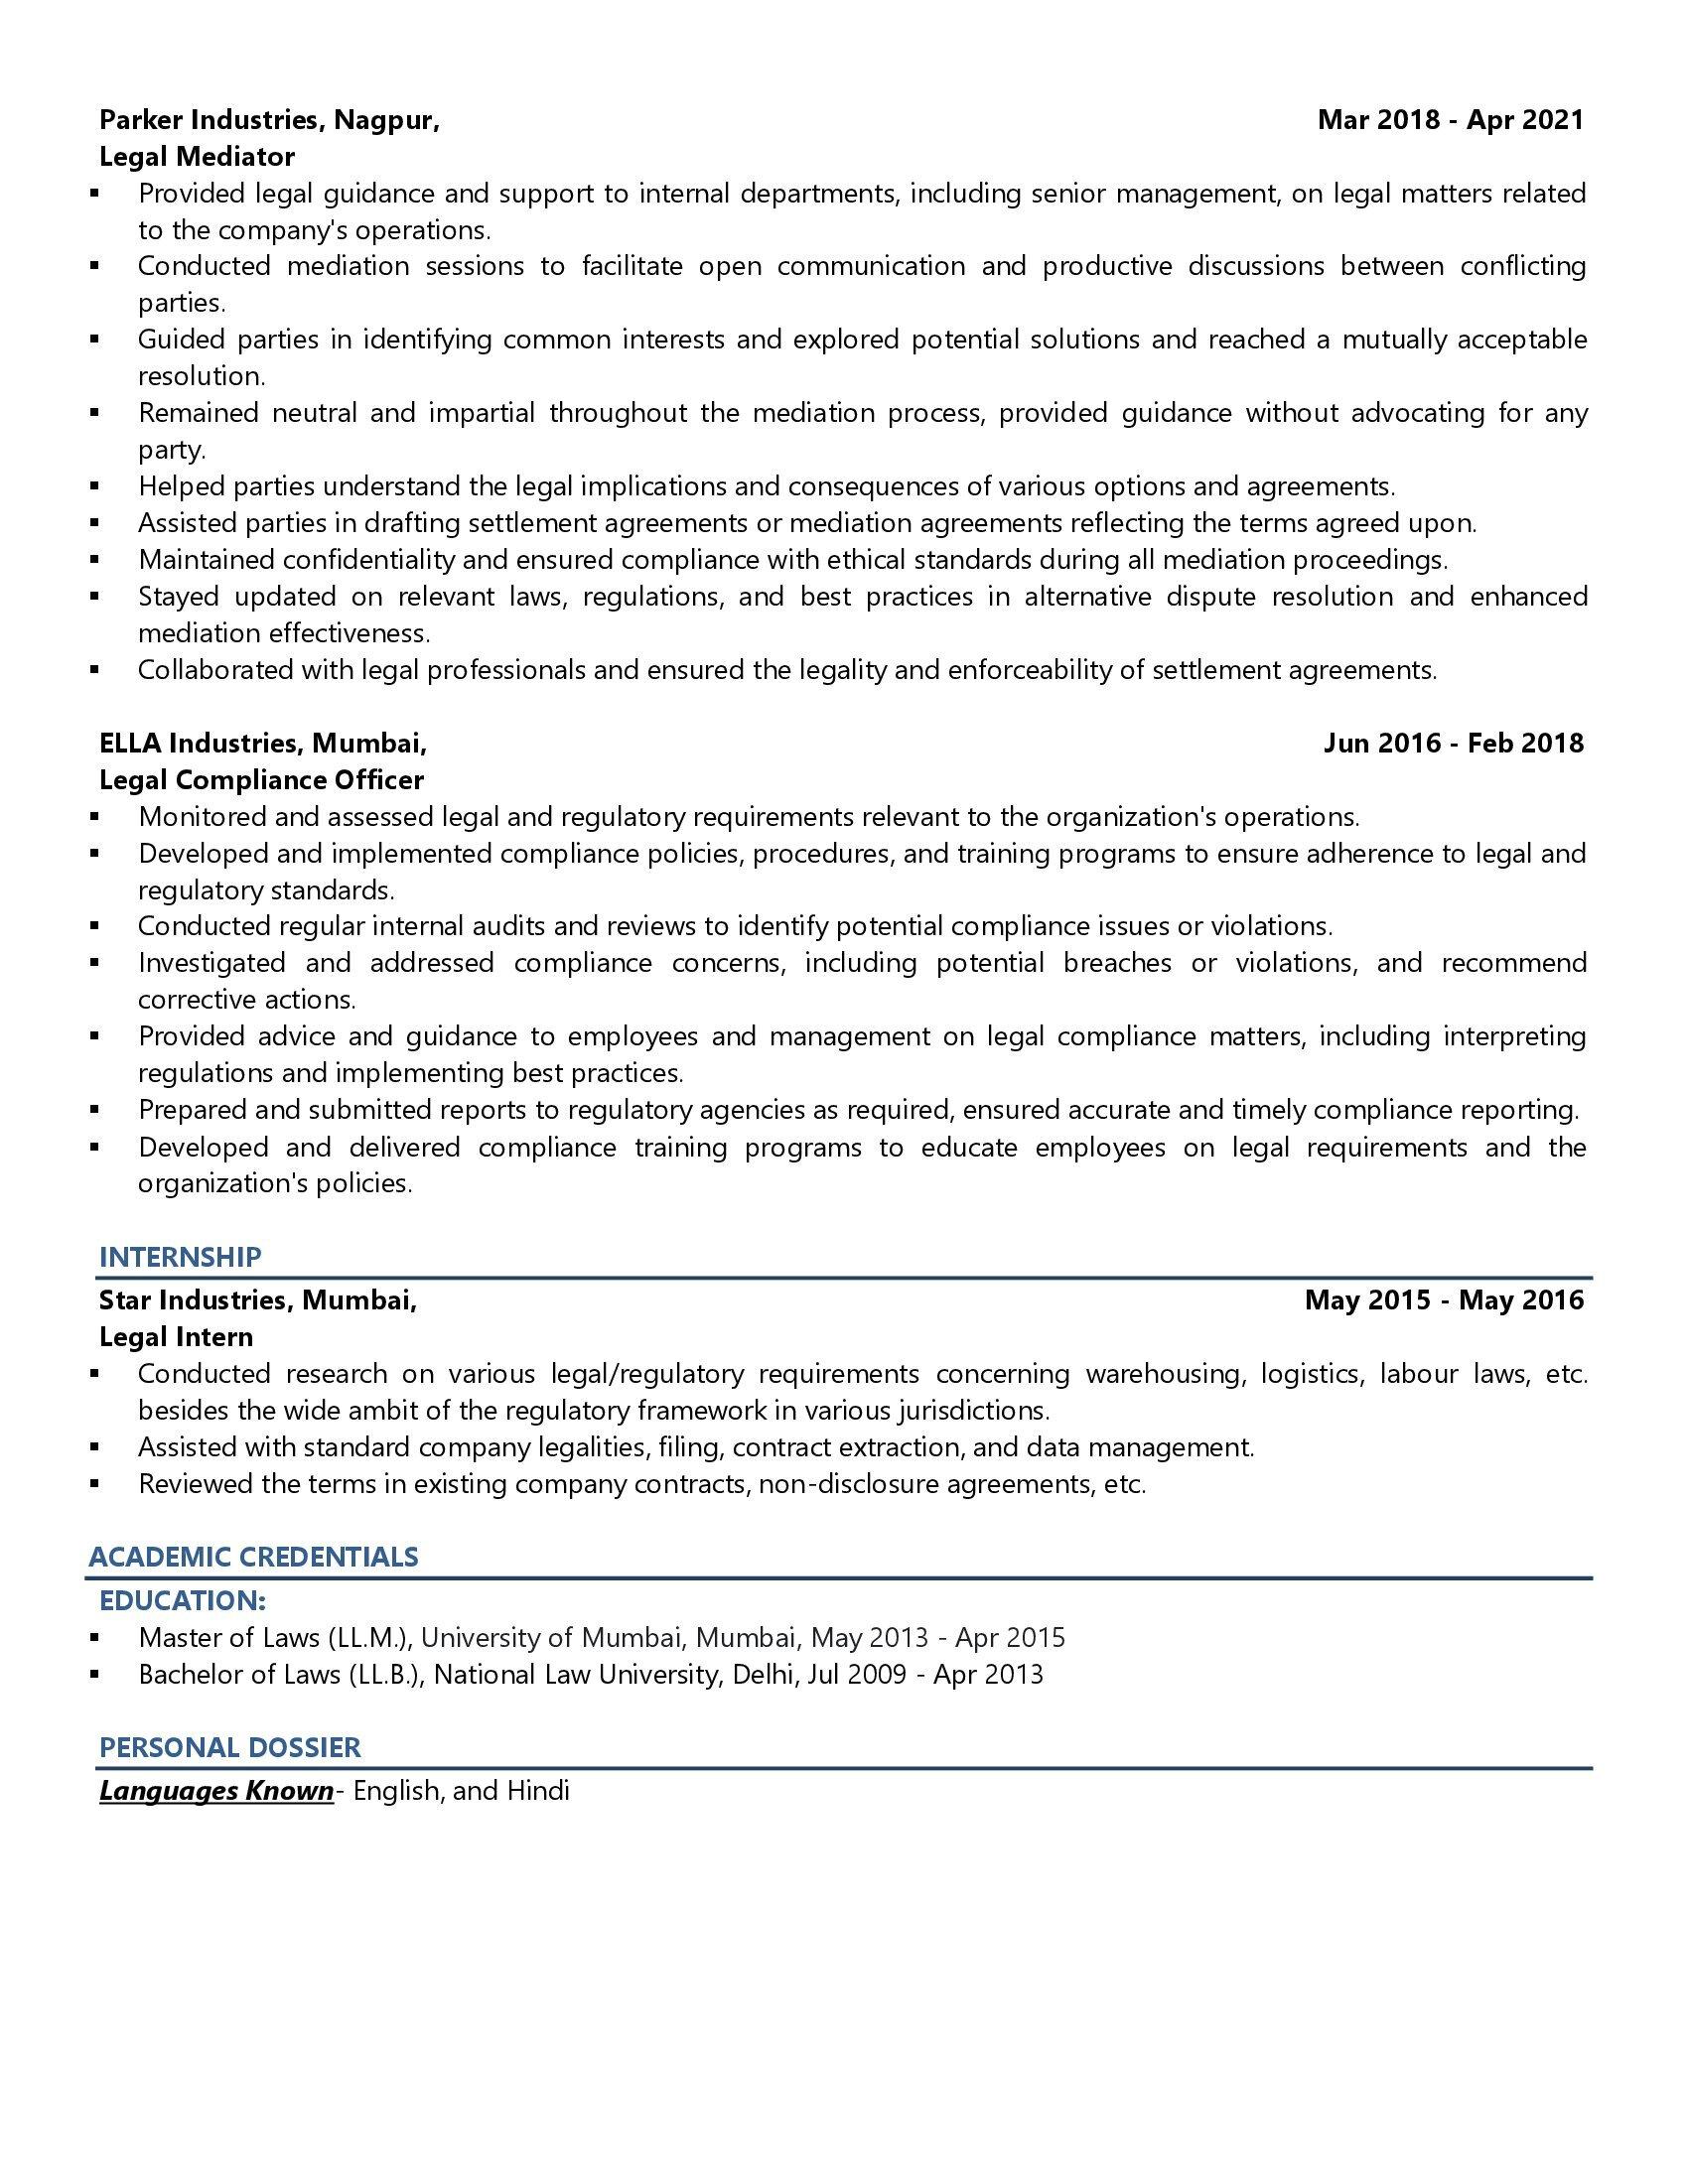 Legal Conflict Management - Resume Example & Template